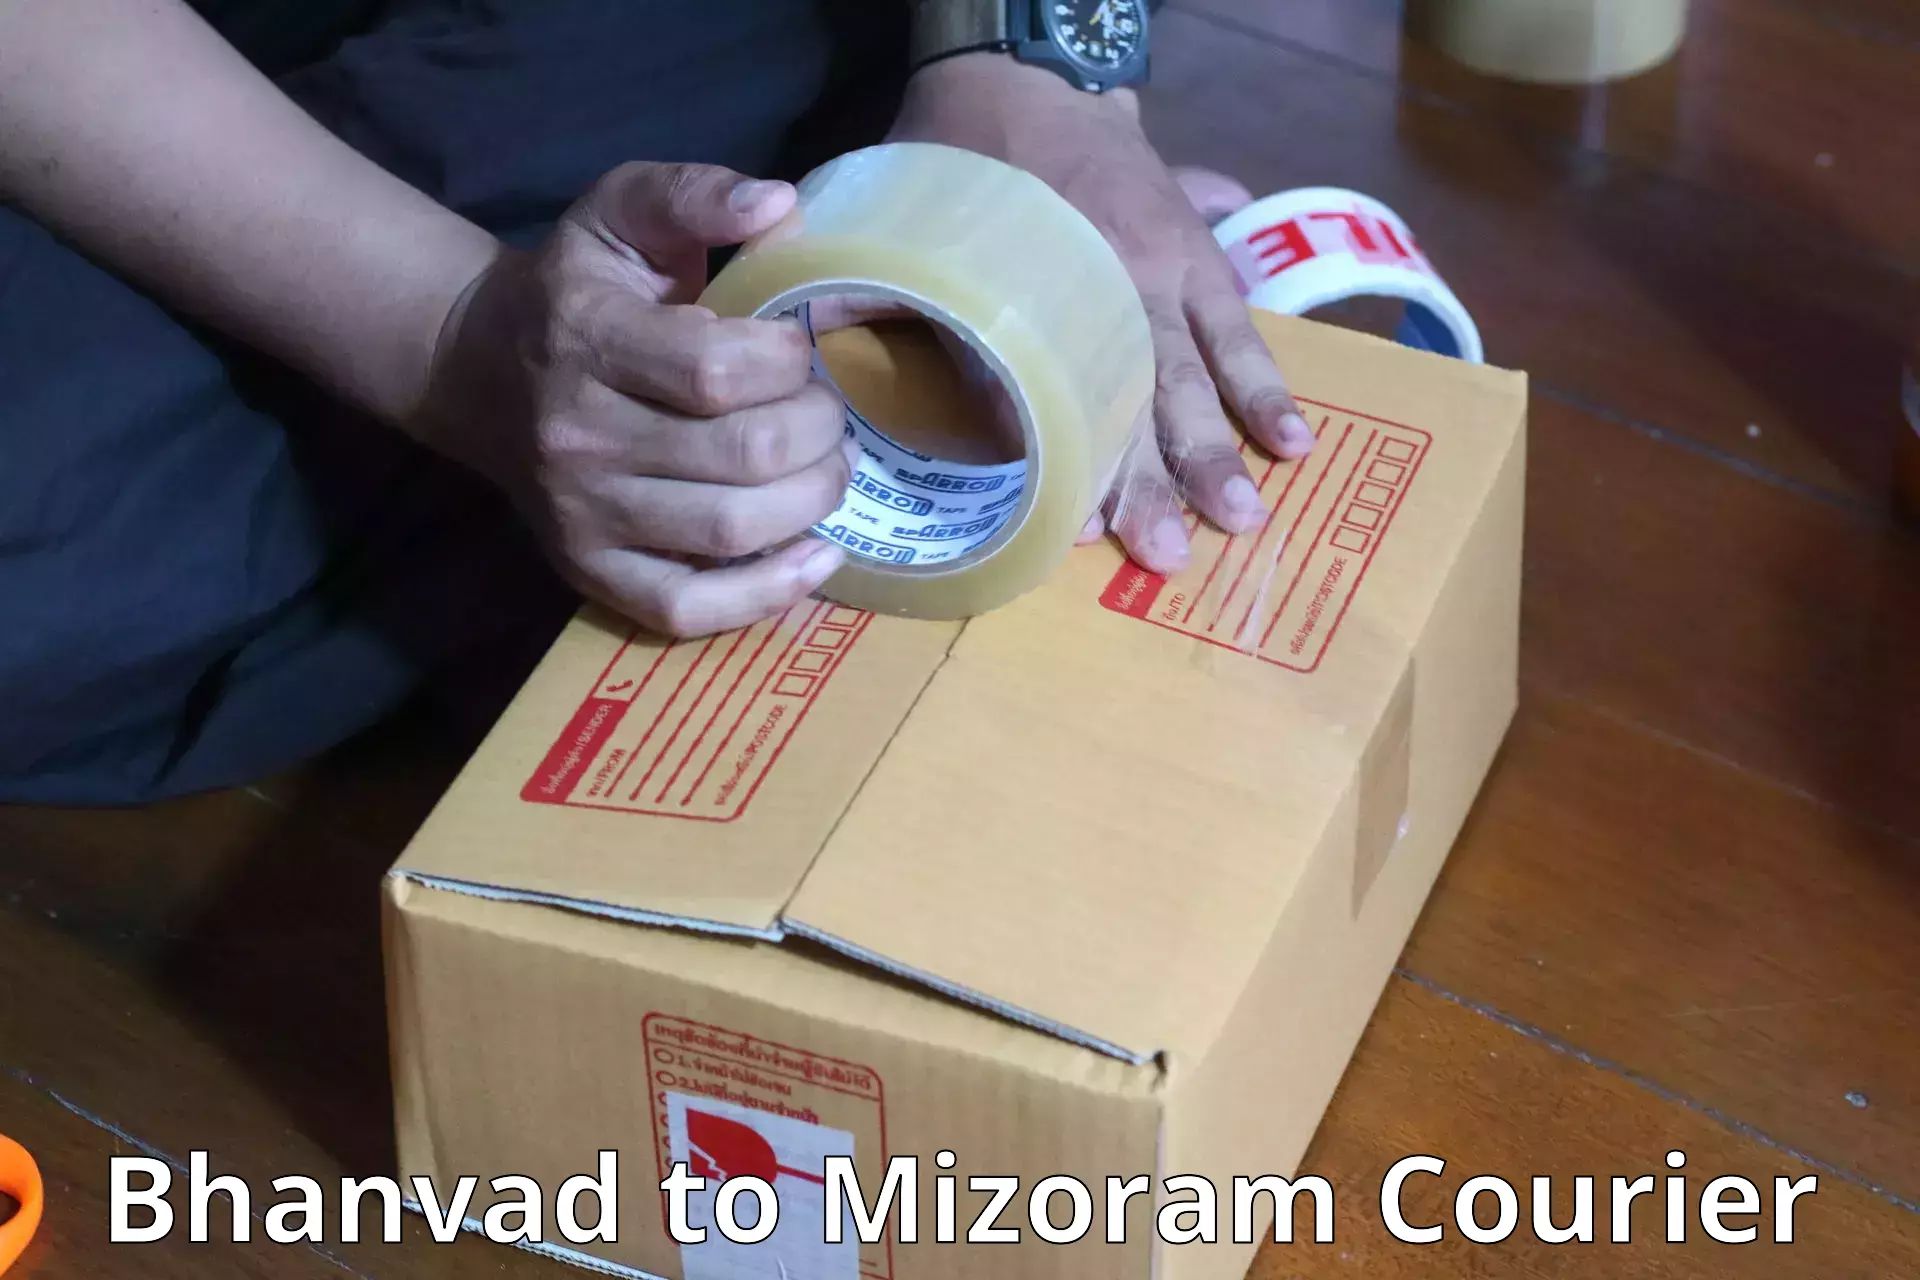 Personal effects shipping in Bhanvad to Aizawl